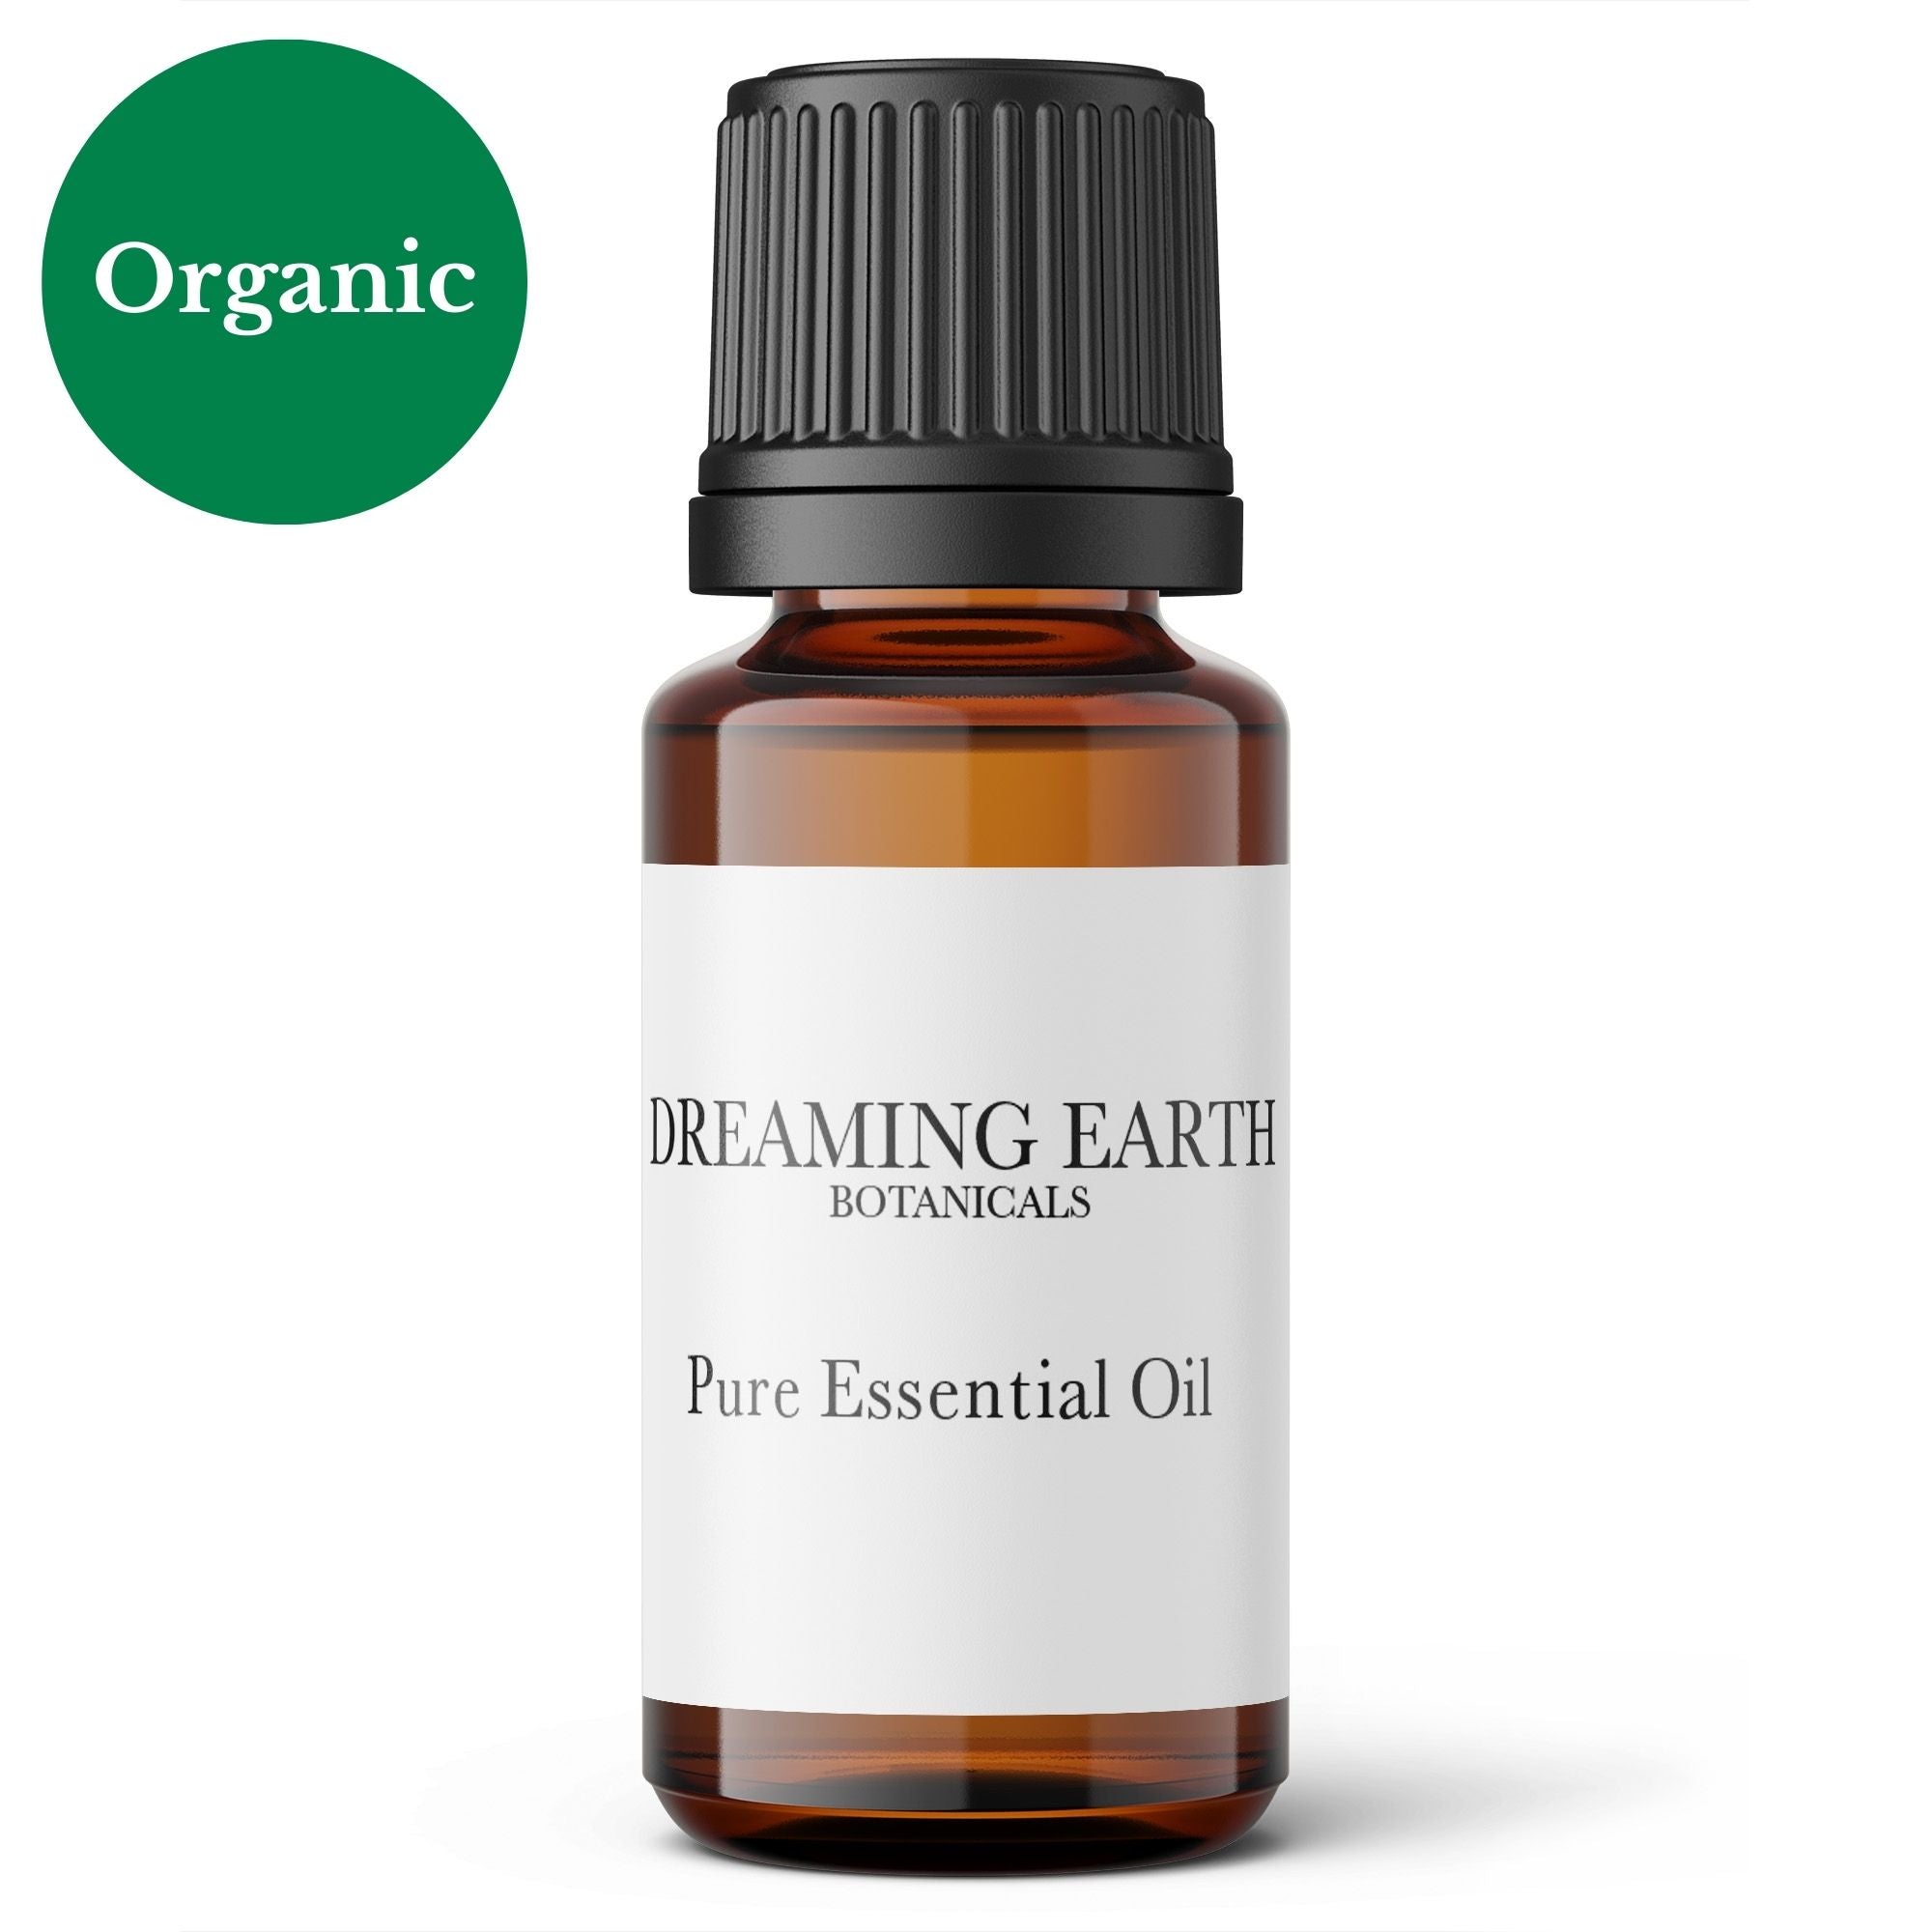 Load image into Gallery viewer, Cajeput Organic Essential Oil
